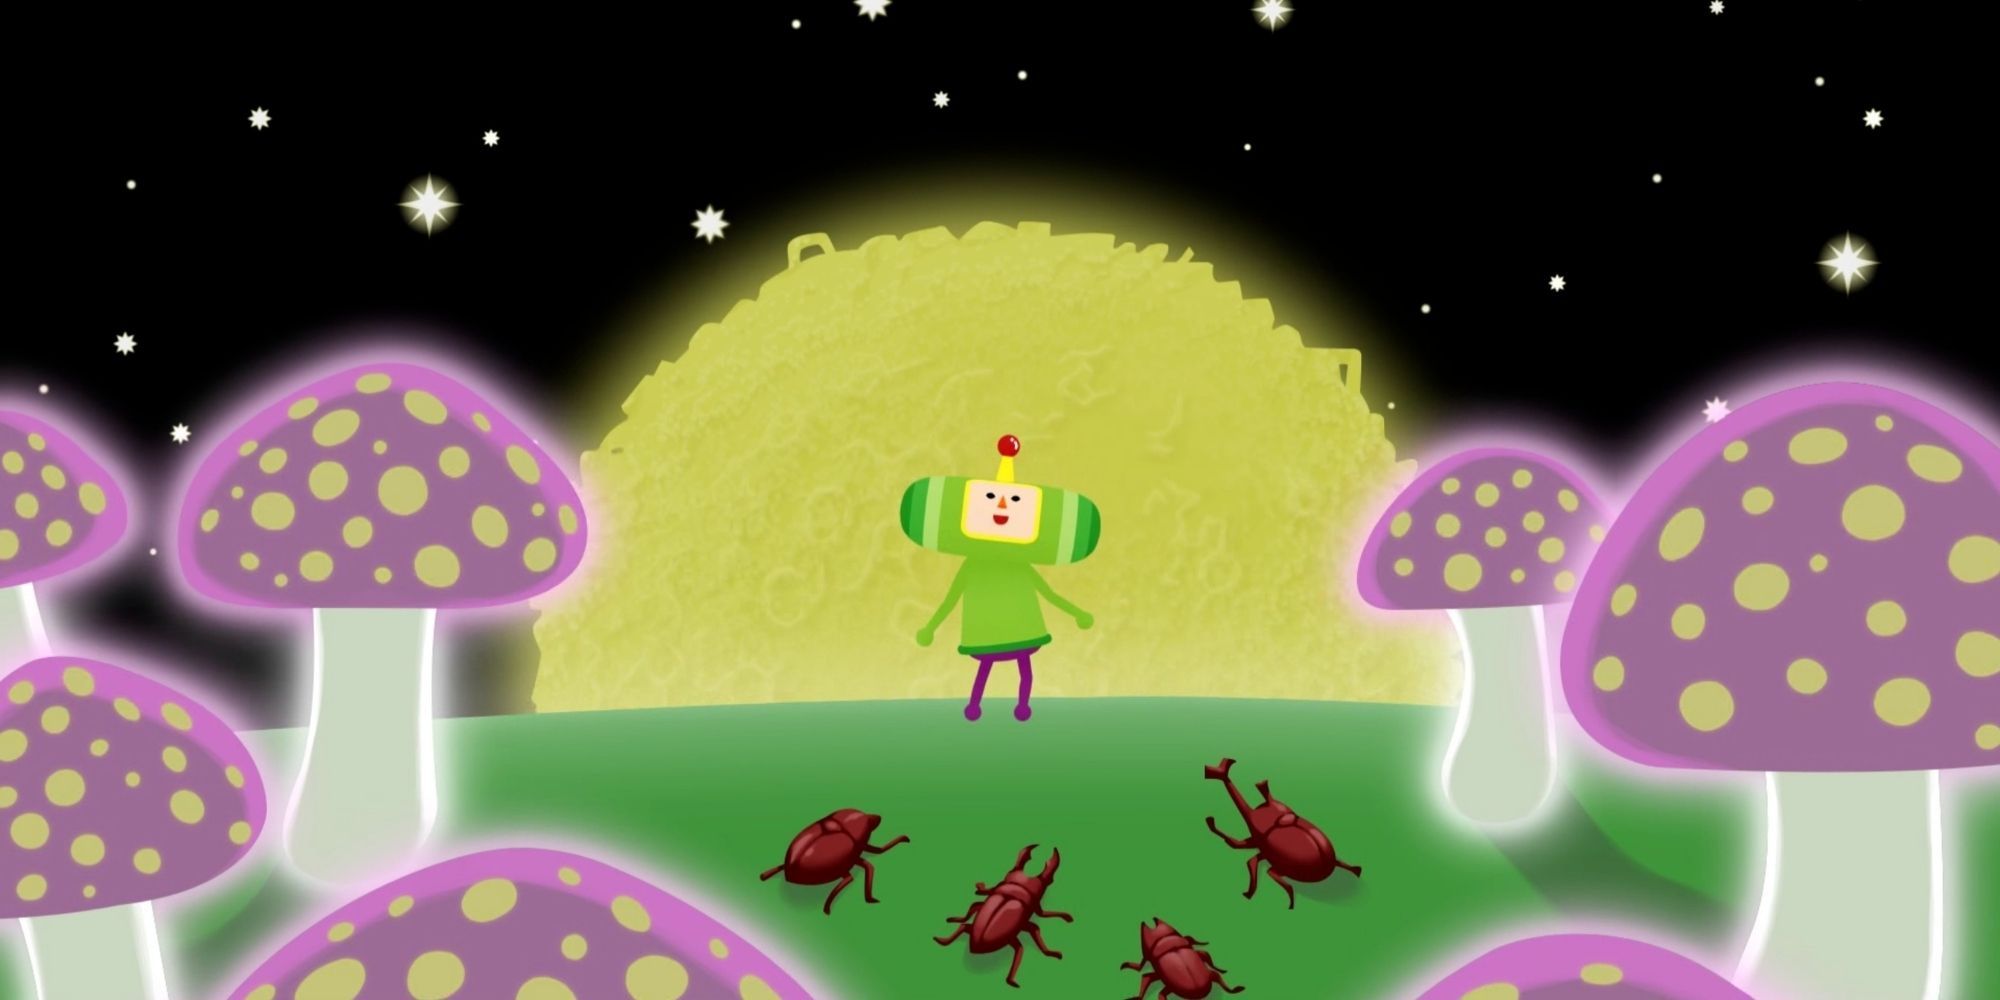 The character The Prince from Katamari Damacy standing infront of a giant sun. Giant mushrooms surround him and 4 horned beetles are walking towards him.